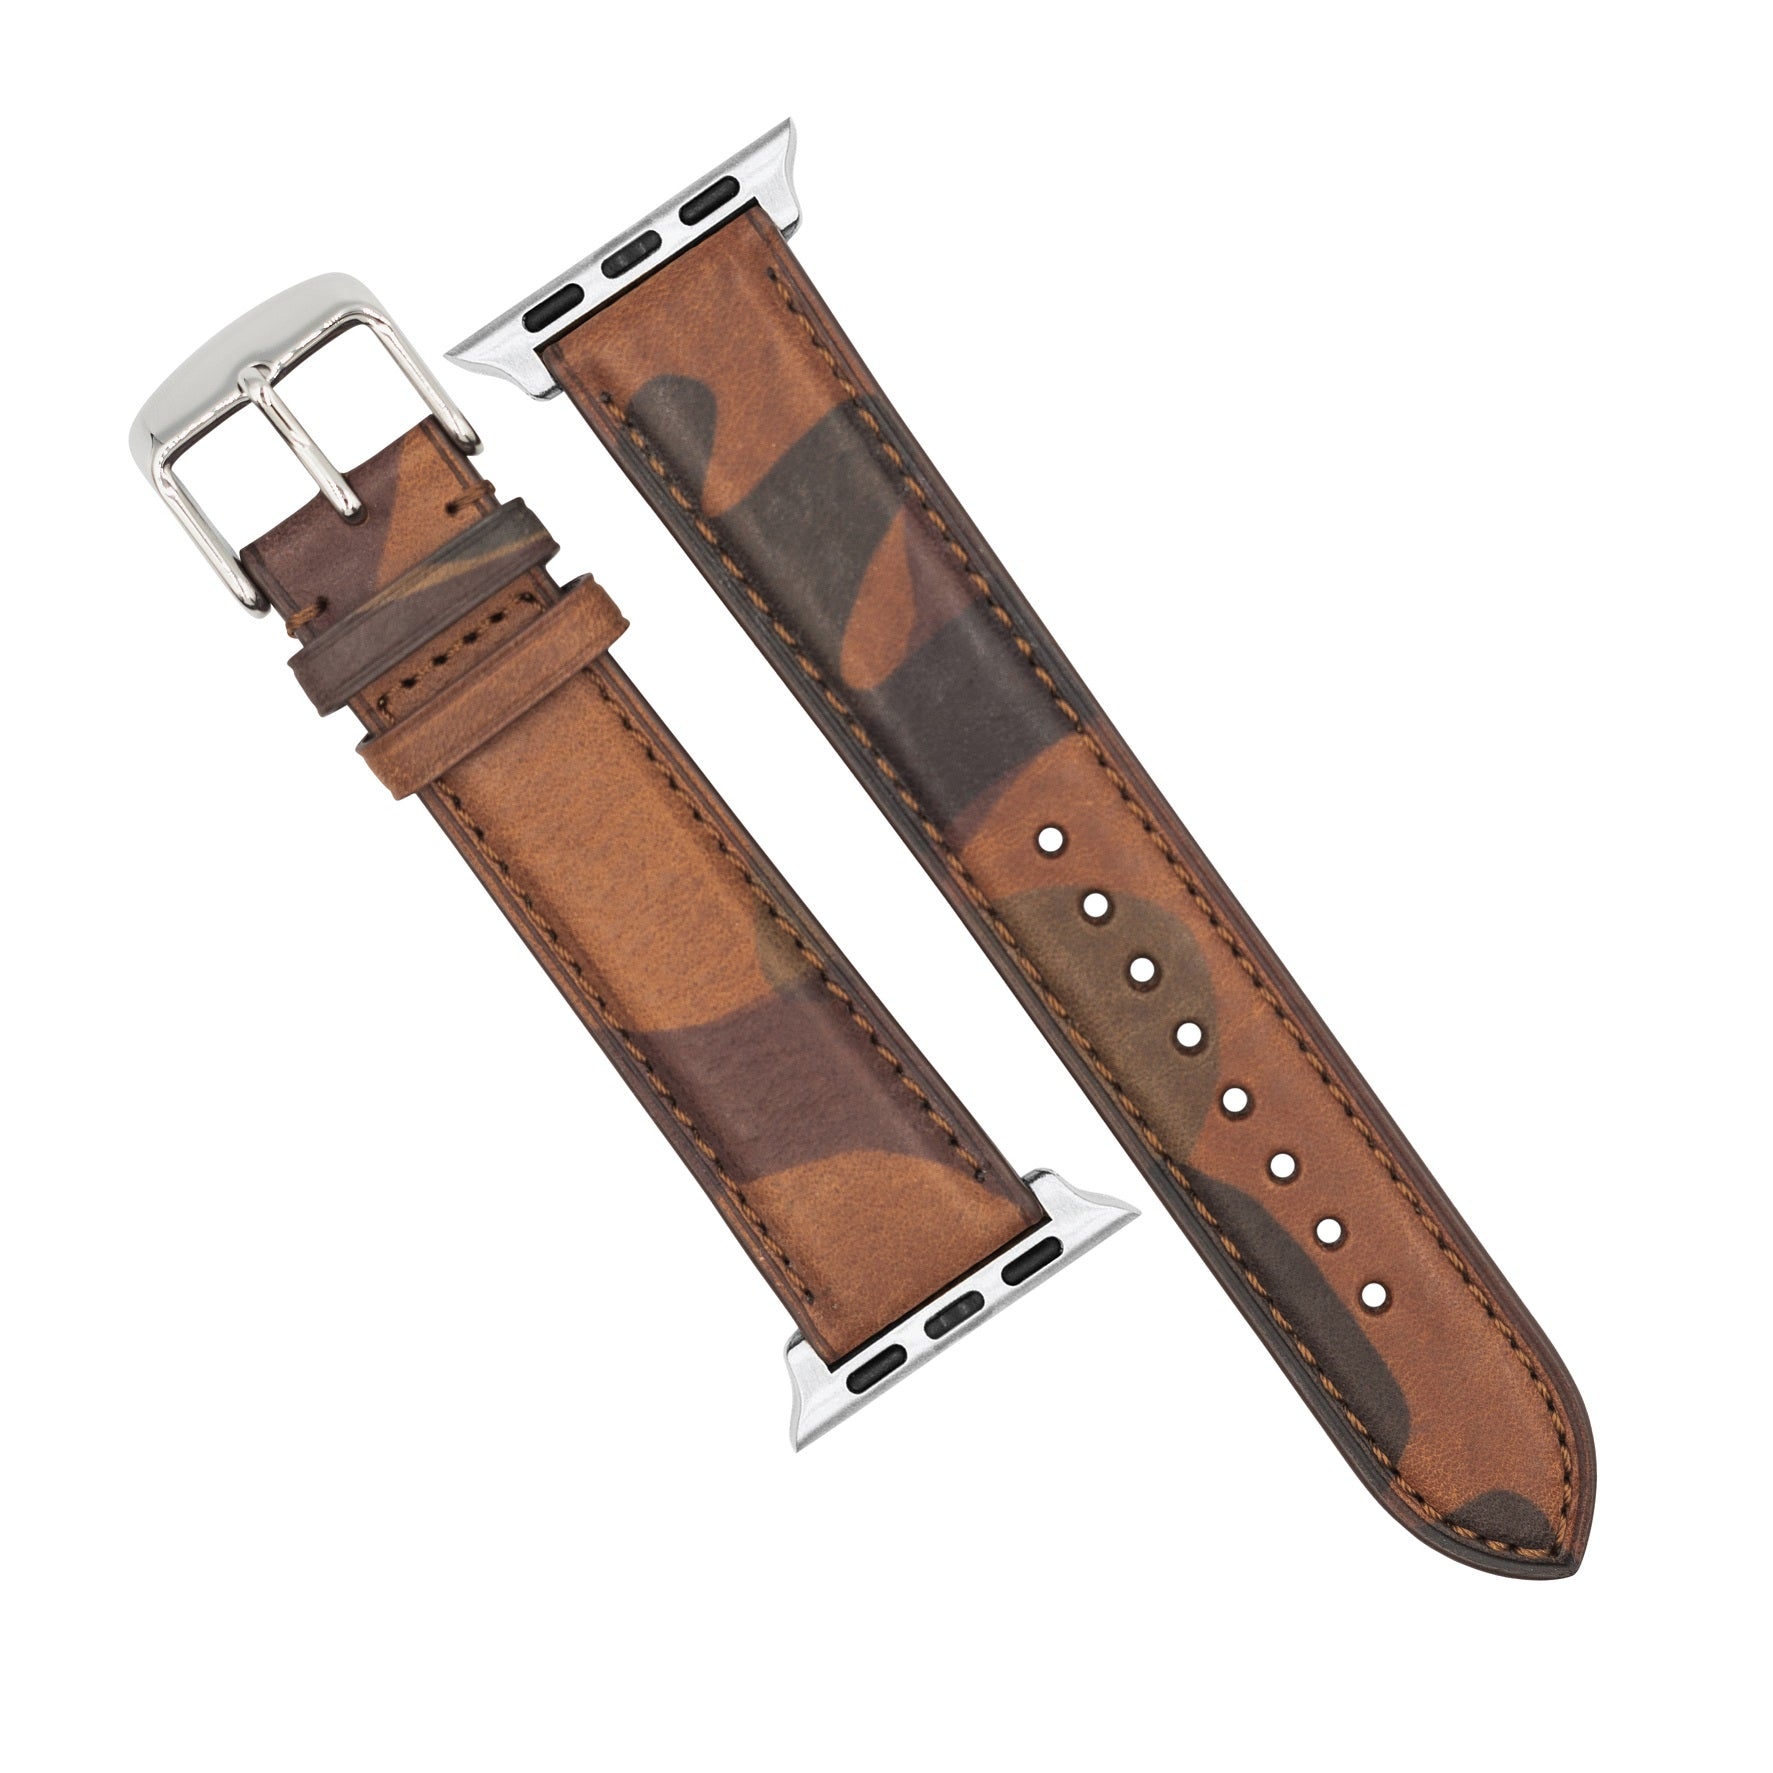 Emery Classic LPA Camo Leather Strap in Sand Camo (38, 40, 41mm) - Nomad Watch Works MY